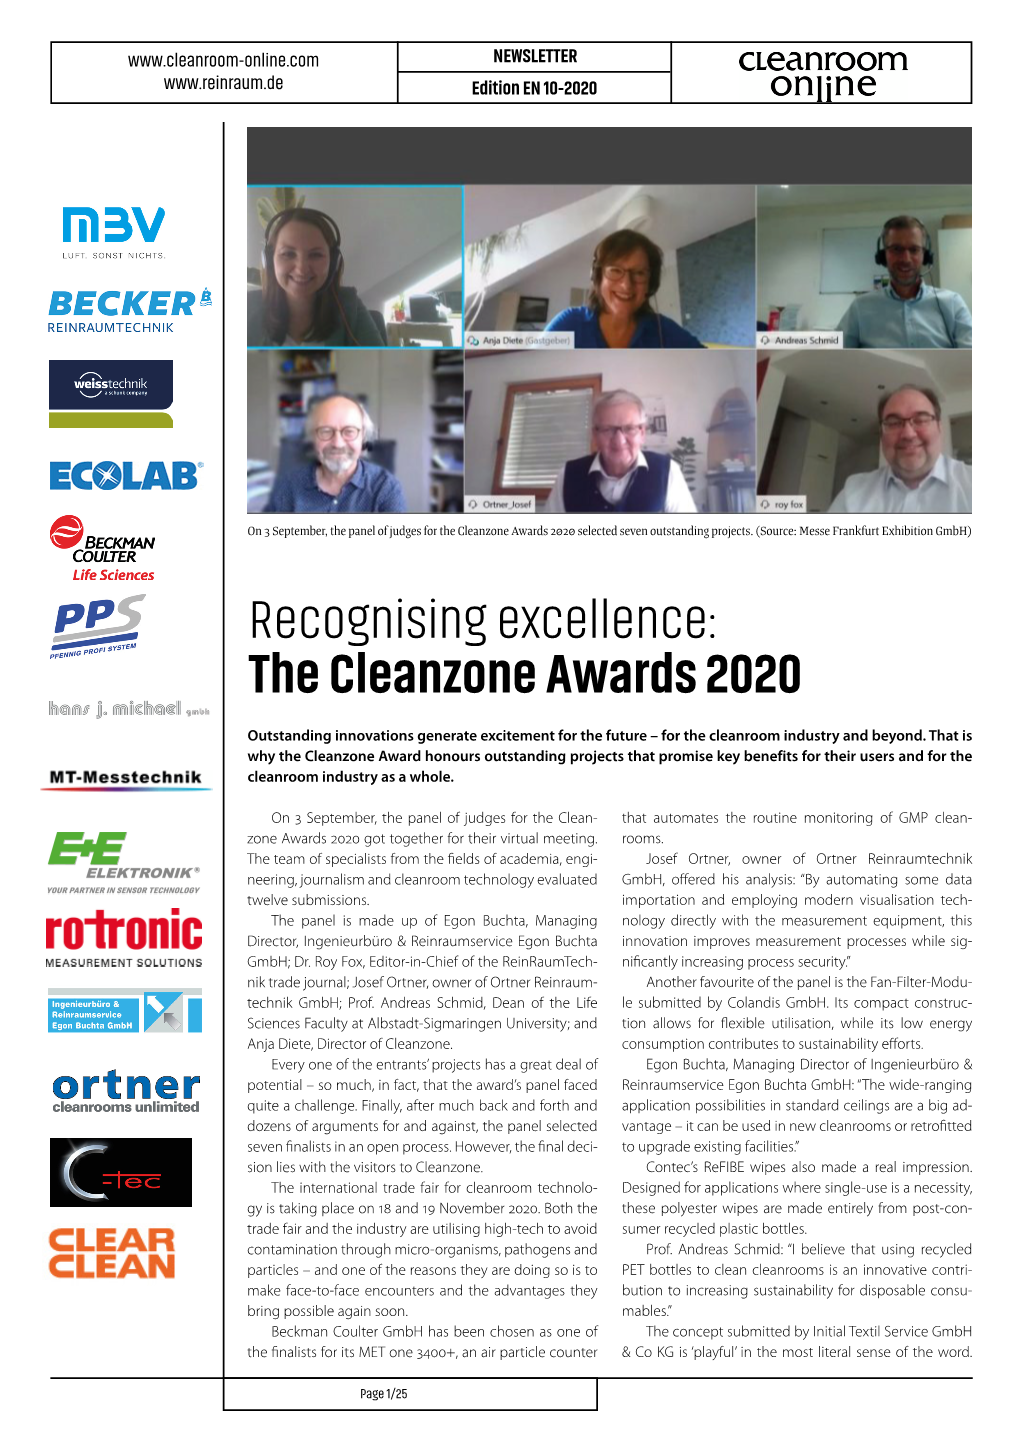 Recognising Excellence: the Cleanzone Awards 2020